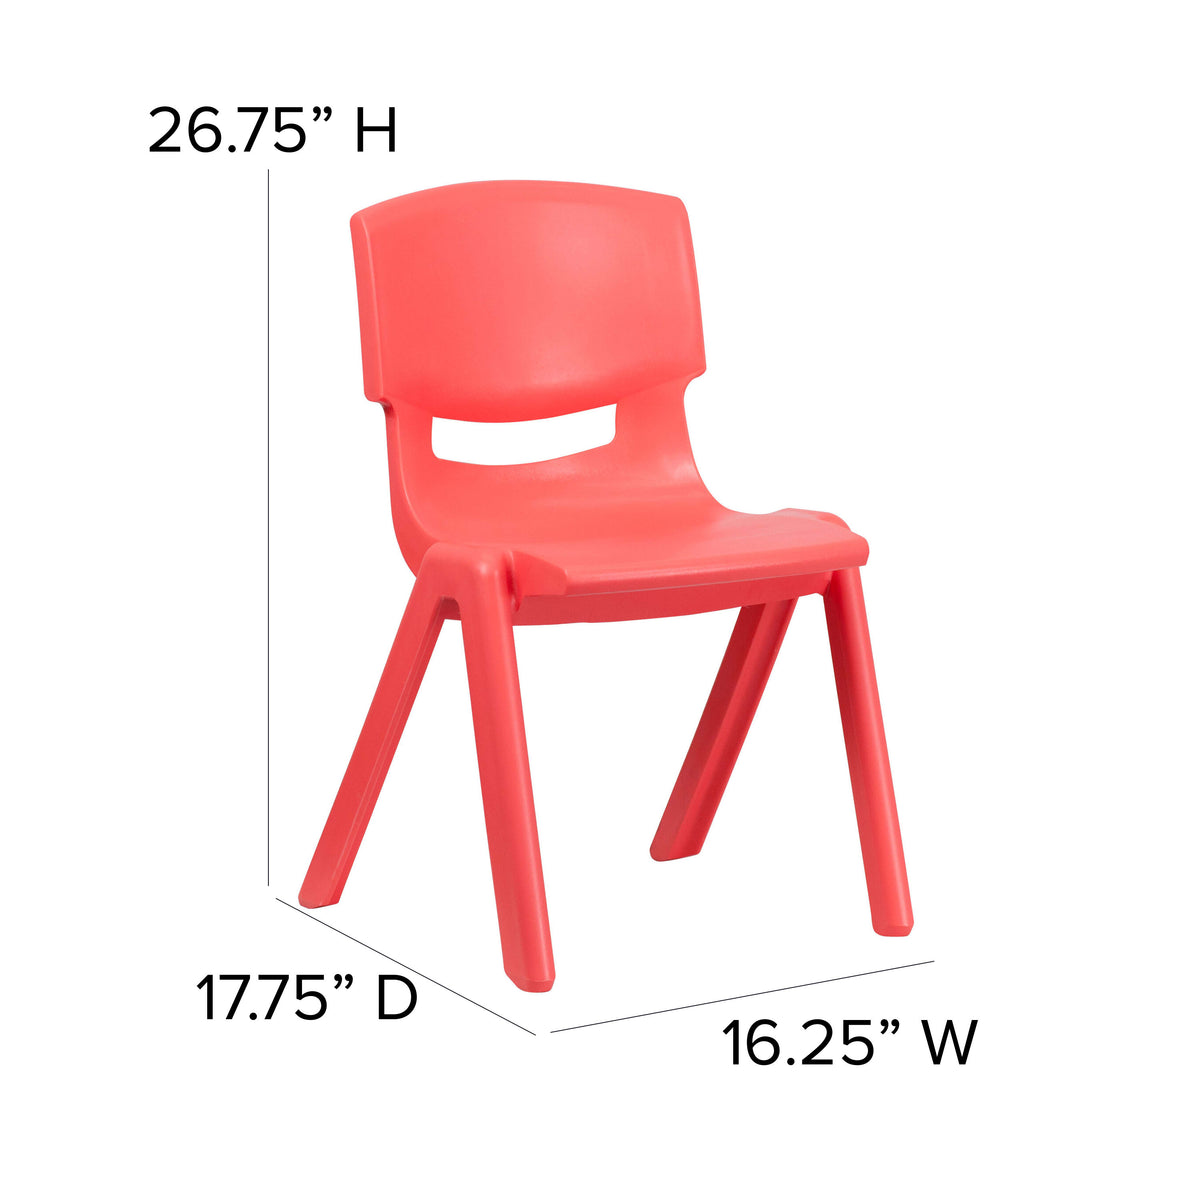 Red |#| 2 Pack Red Plastic Stackable School Chair with 15.5inchH Seat